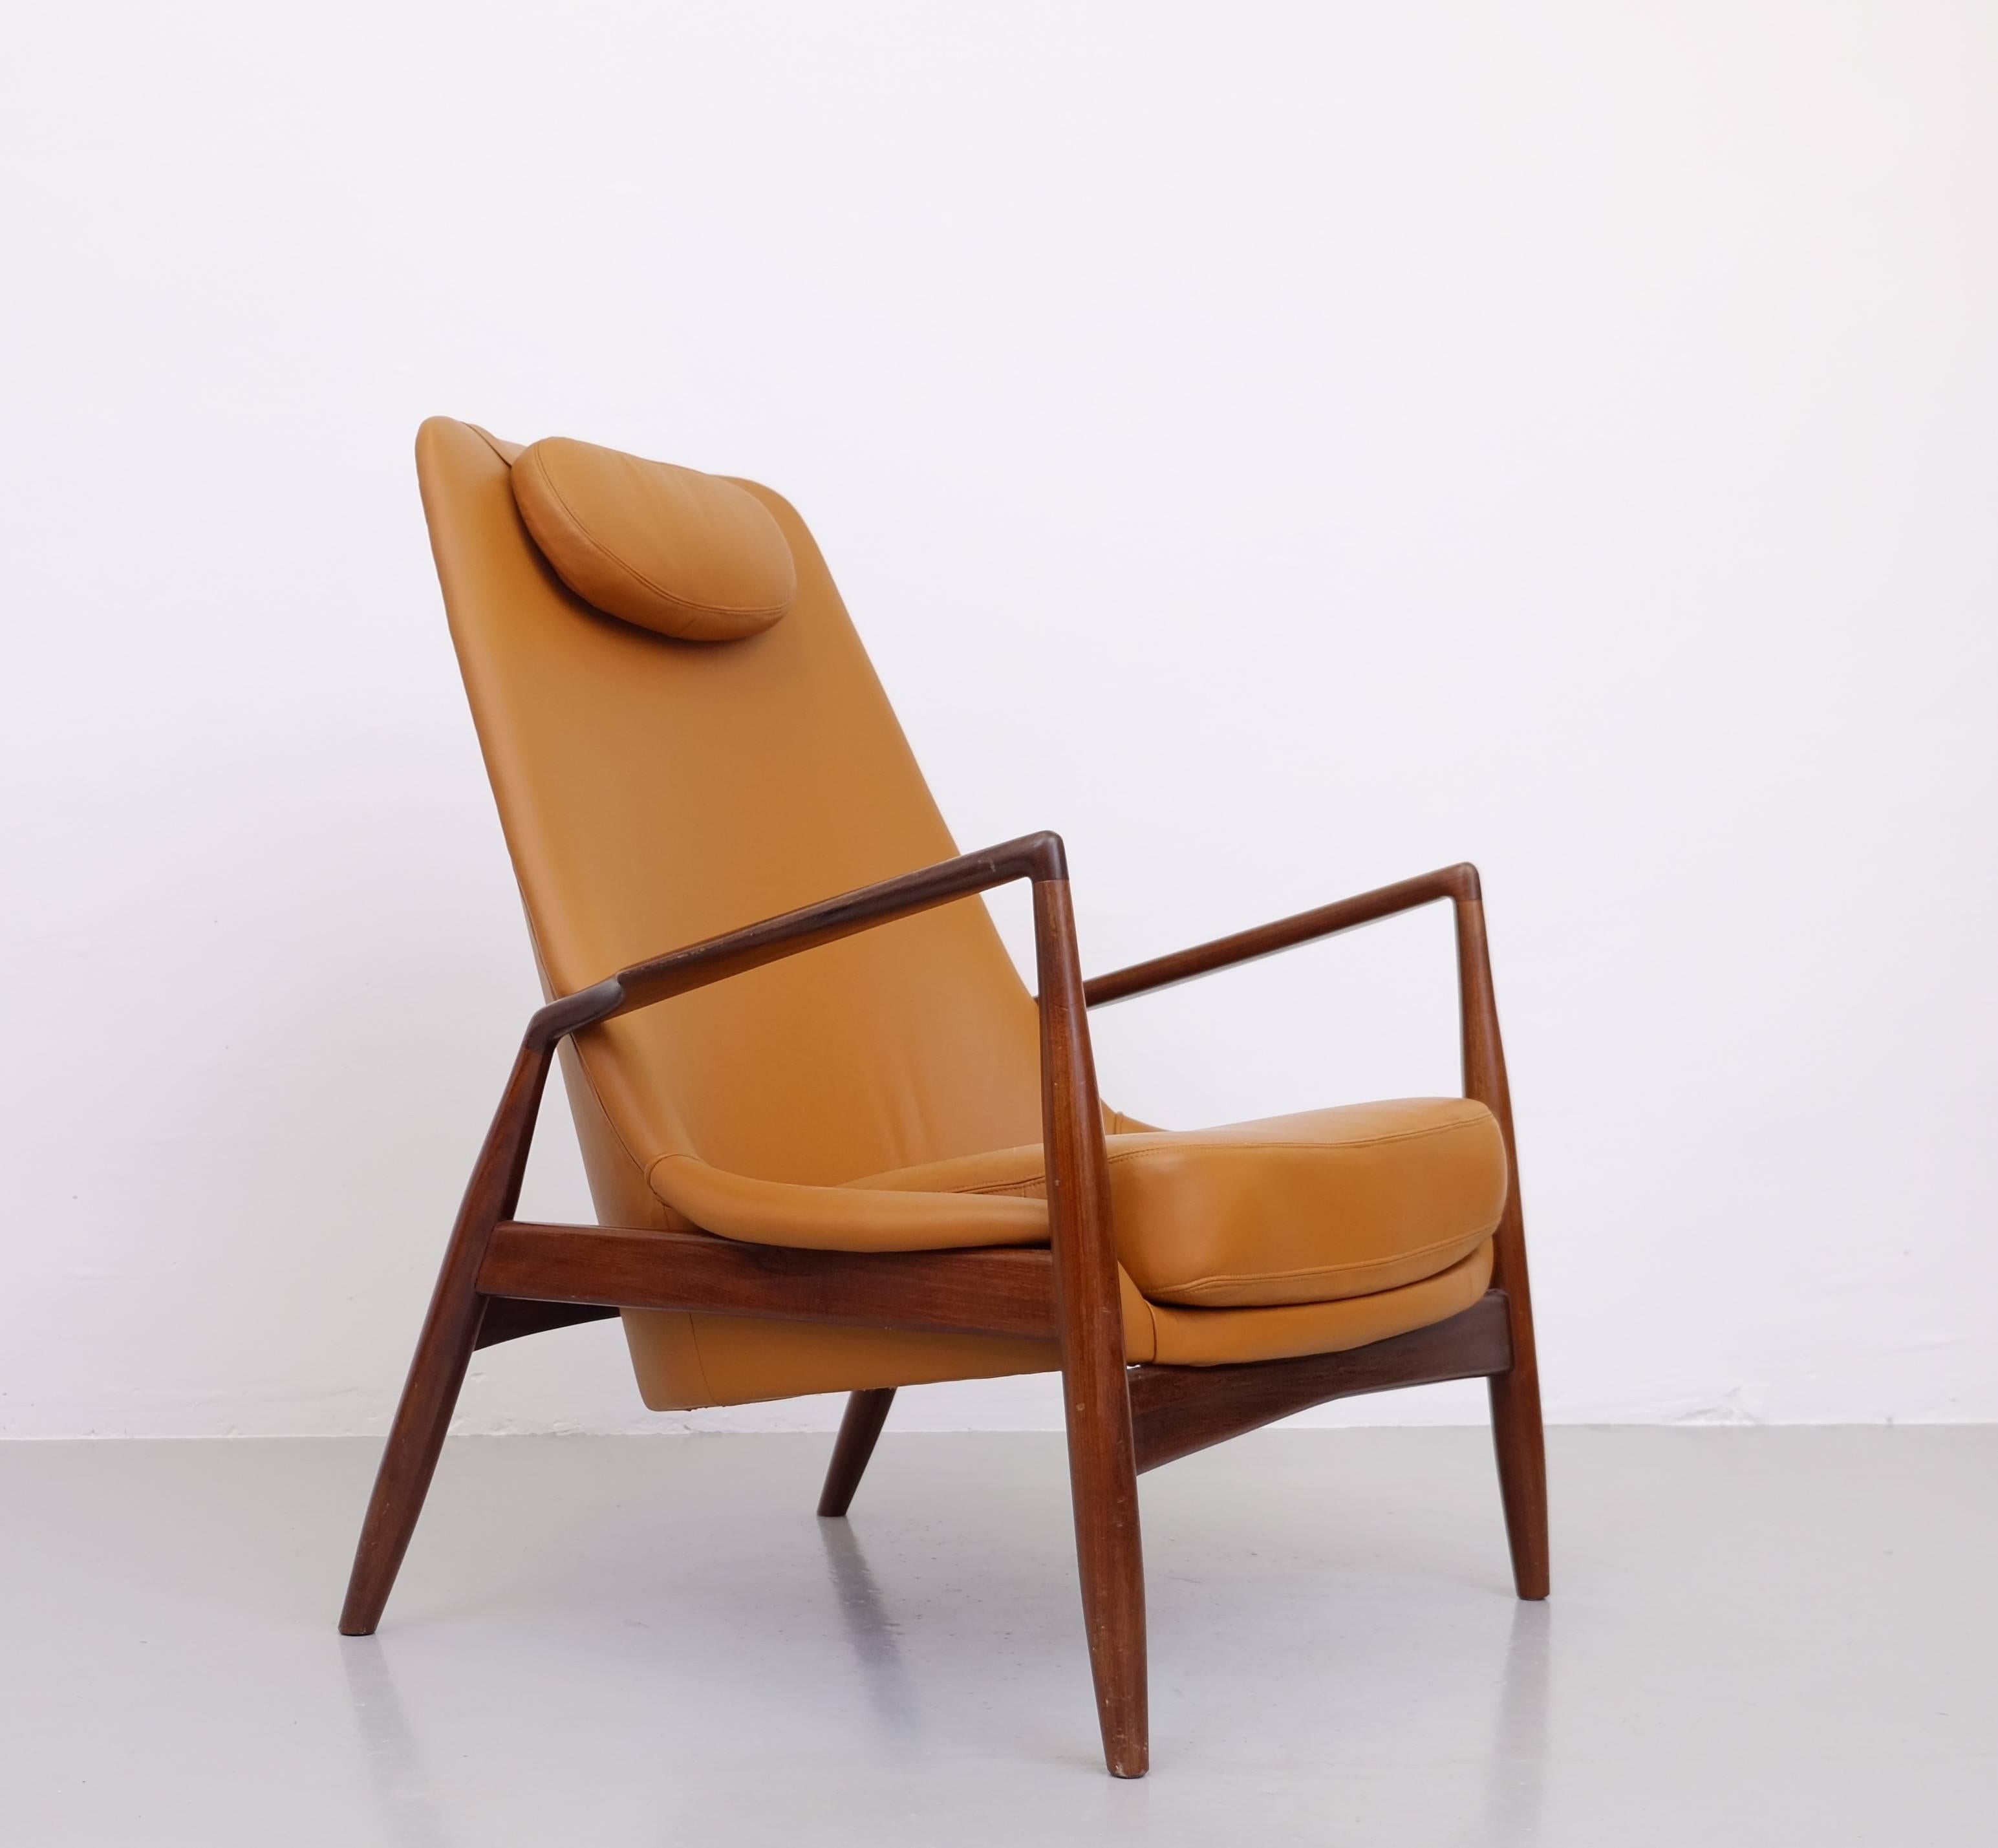 Ib Kofod-Larsen seal easy chair. Genuine cognac brown leather. Produced by OPE.